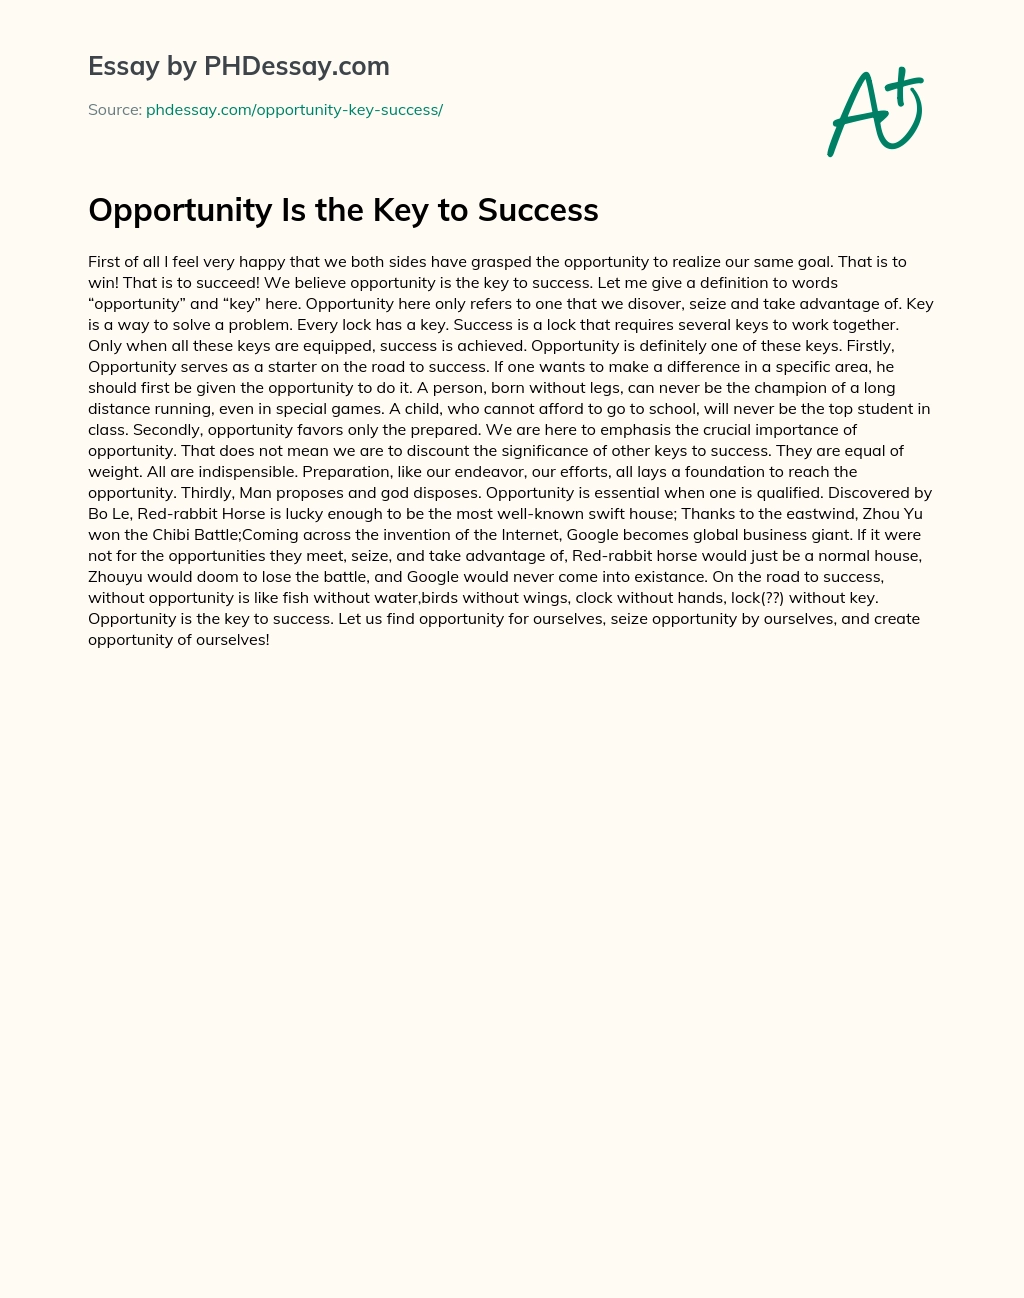 Opportunity Is the Key to Success essay